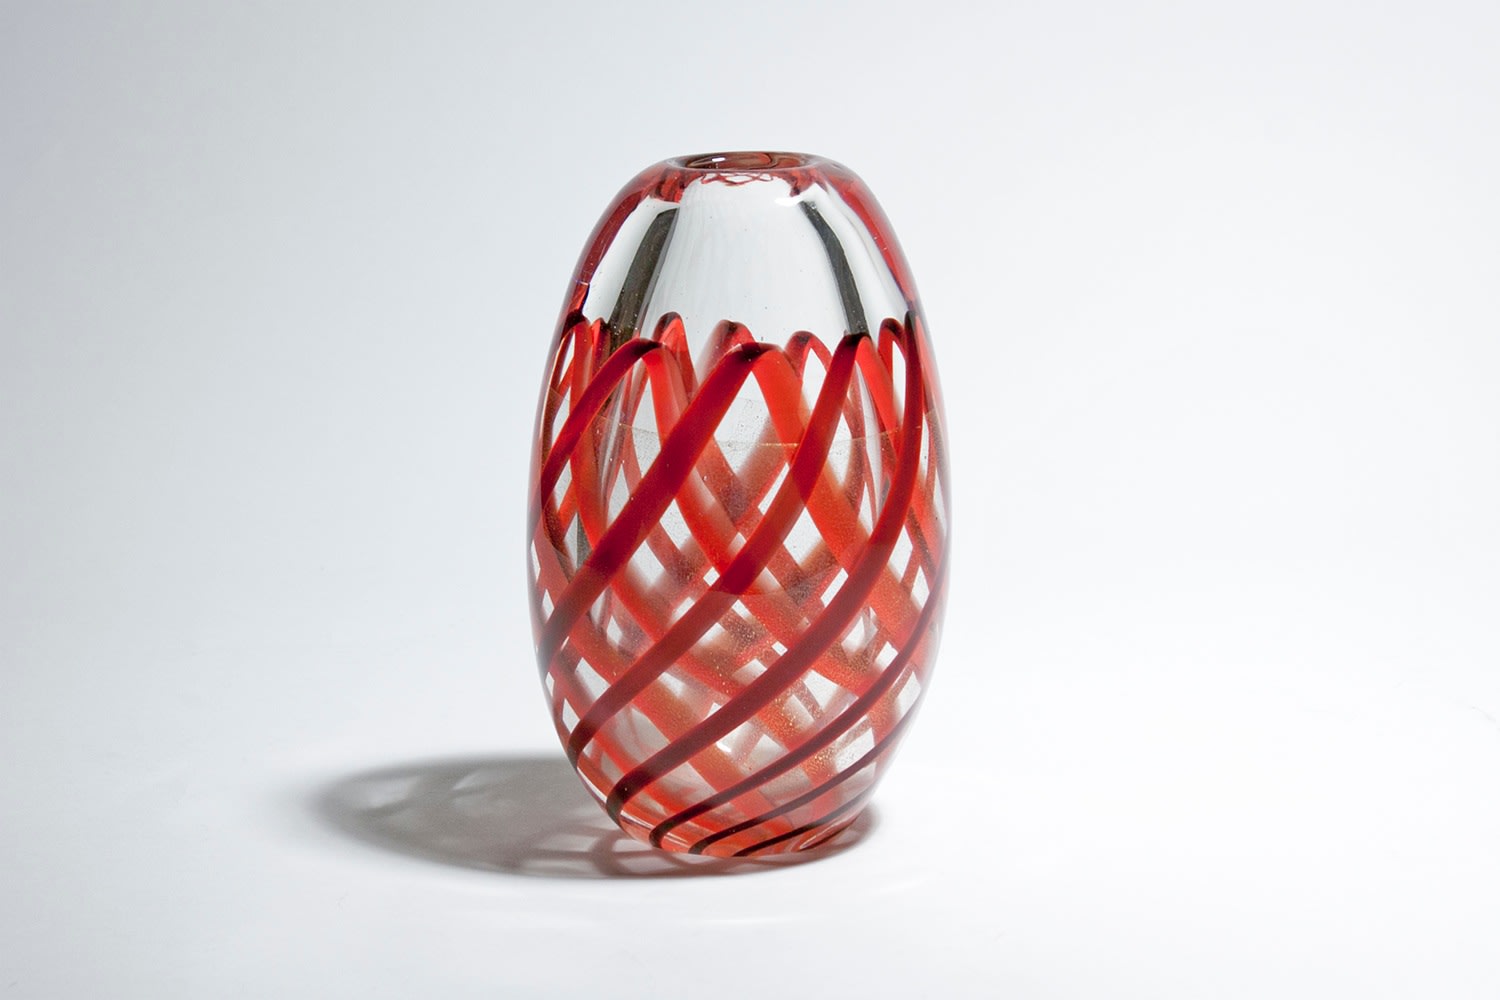 a midcentury italian glass vase, a thick layer of clear glass encasing a motif in in the lower ⅔ of thick red bands of glass overlapping in a &quot;lattice&quot; style pattern, with a thin layer of gold sparkle in between the layers of red.